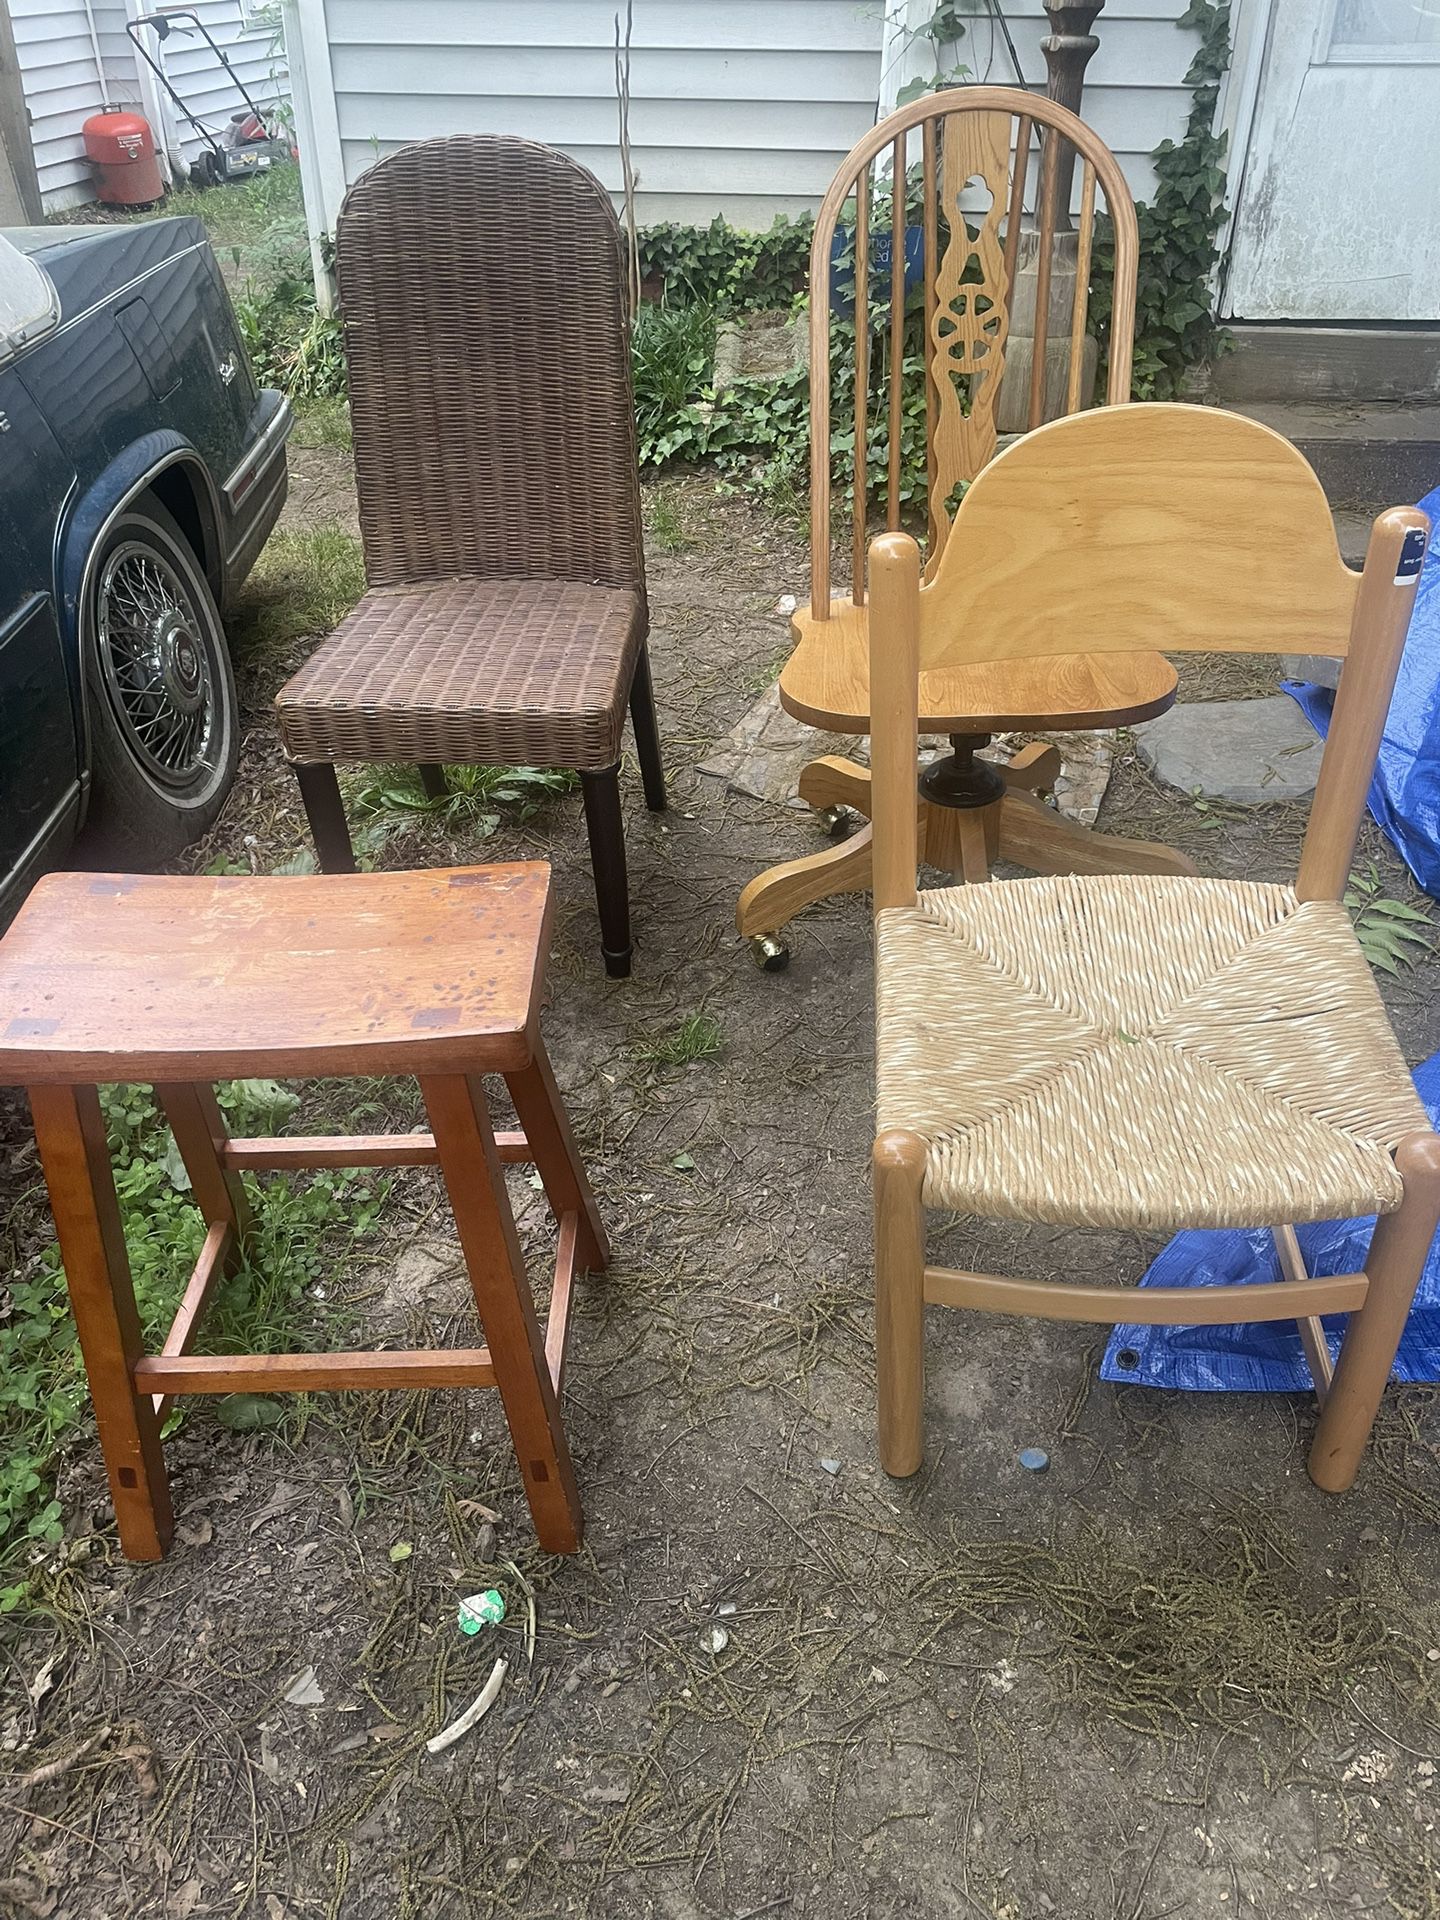 4 Wooden Chairs, Five Dollars Each